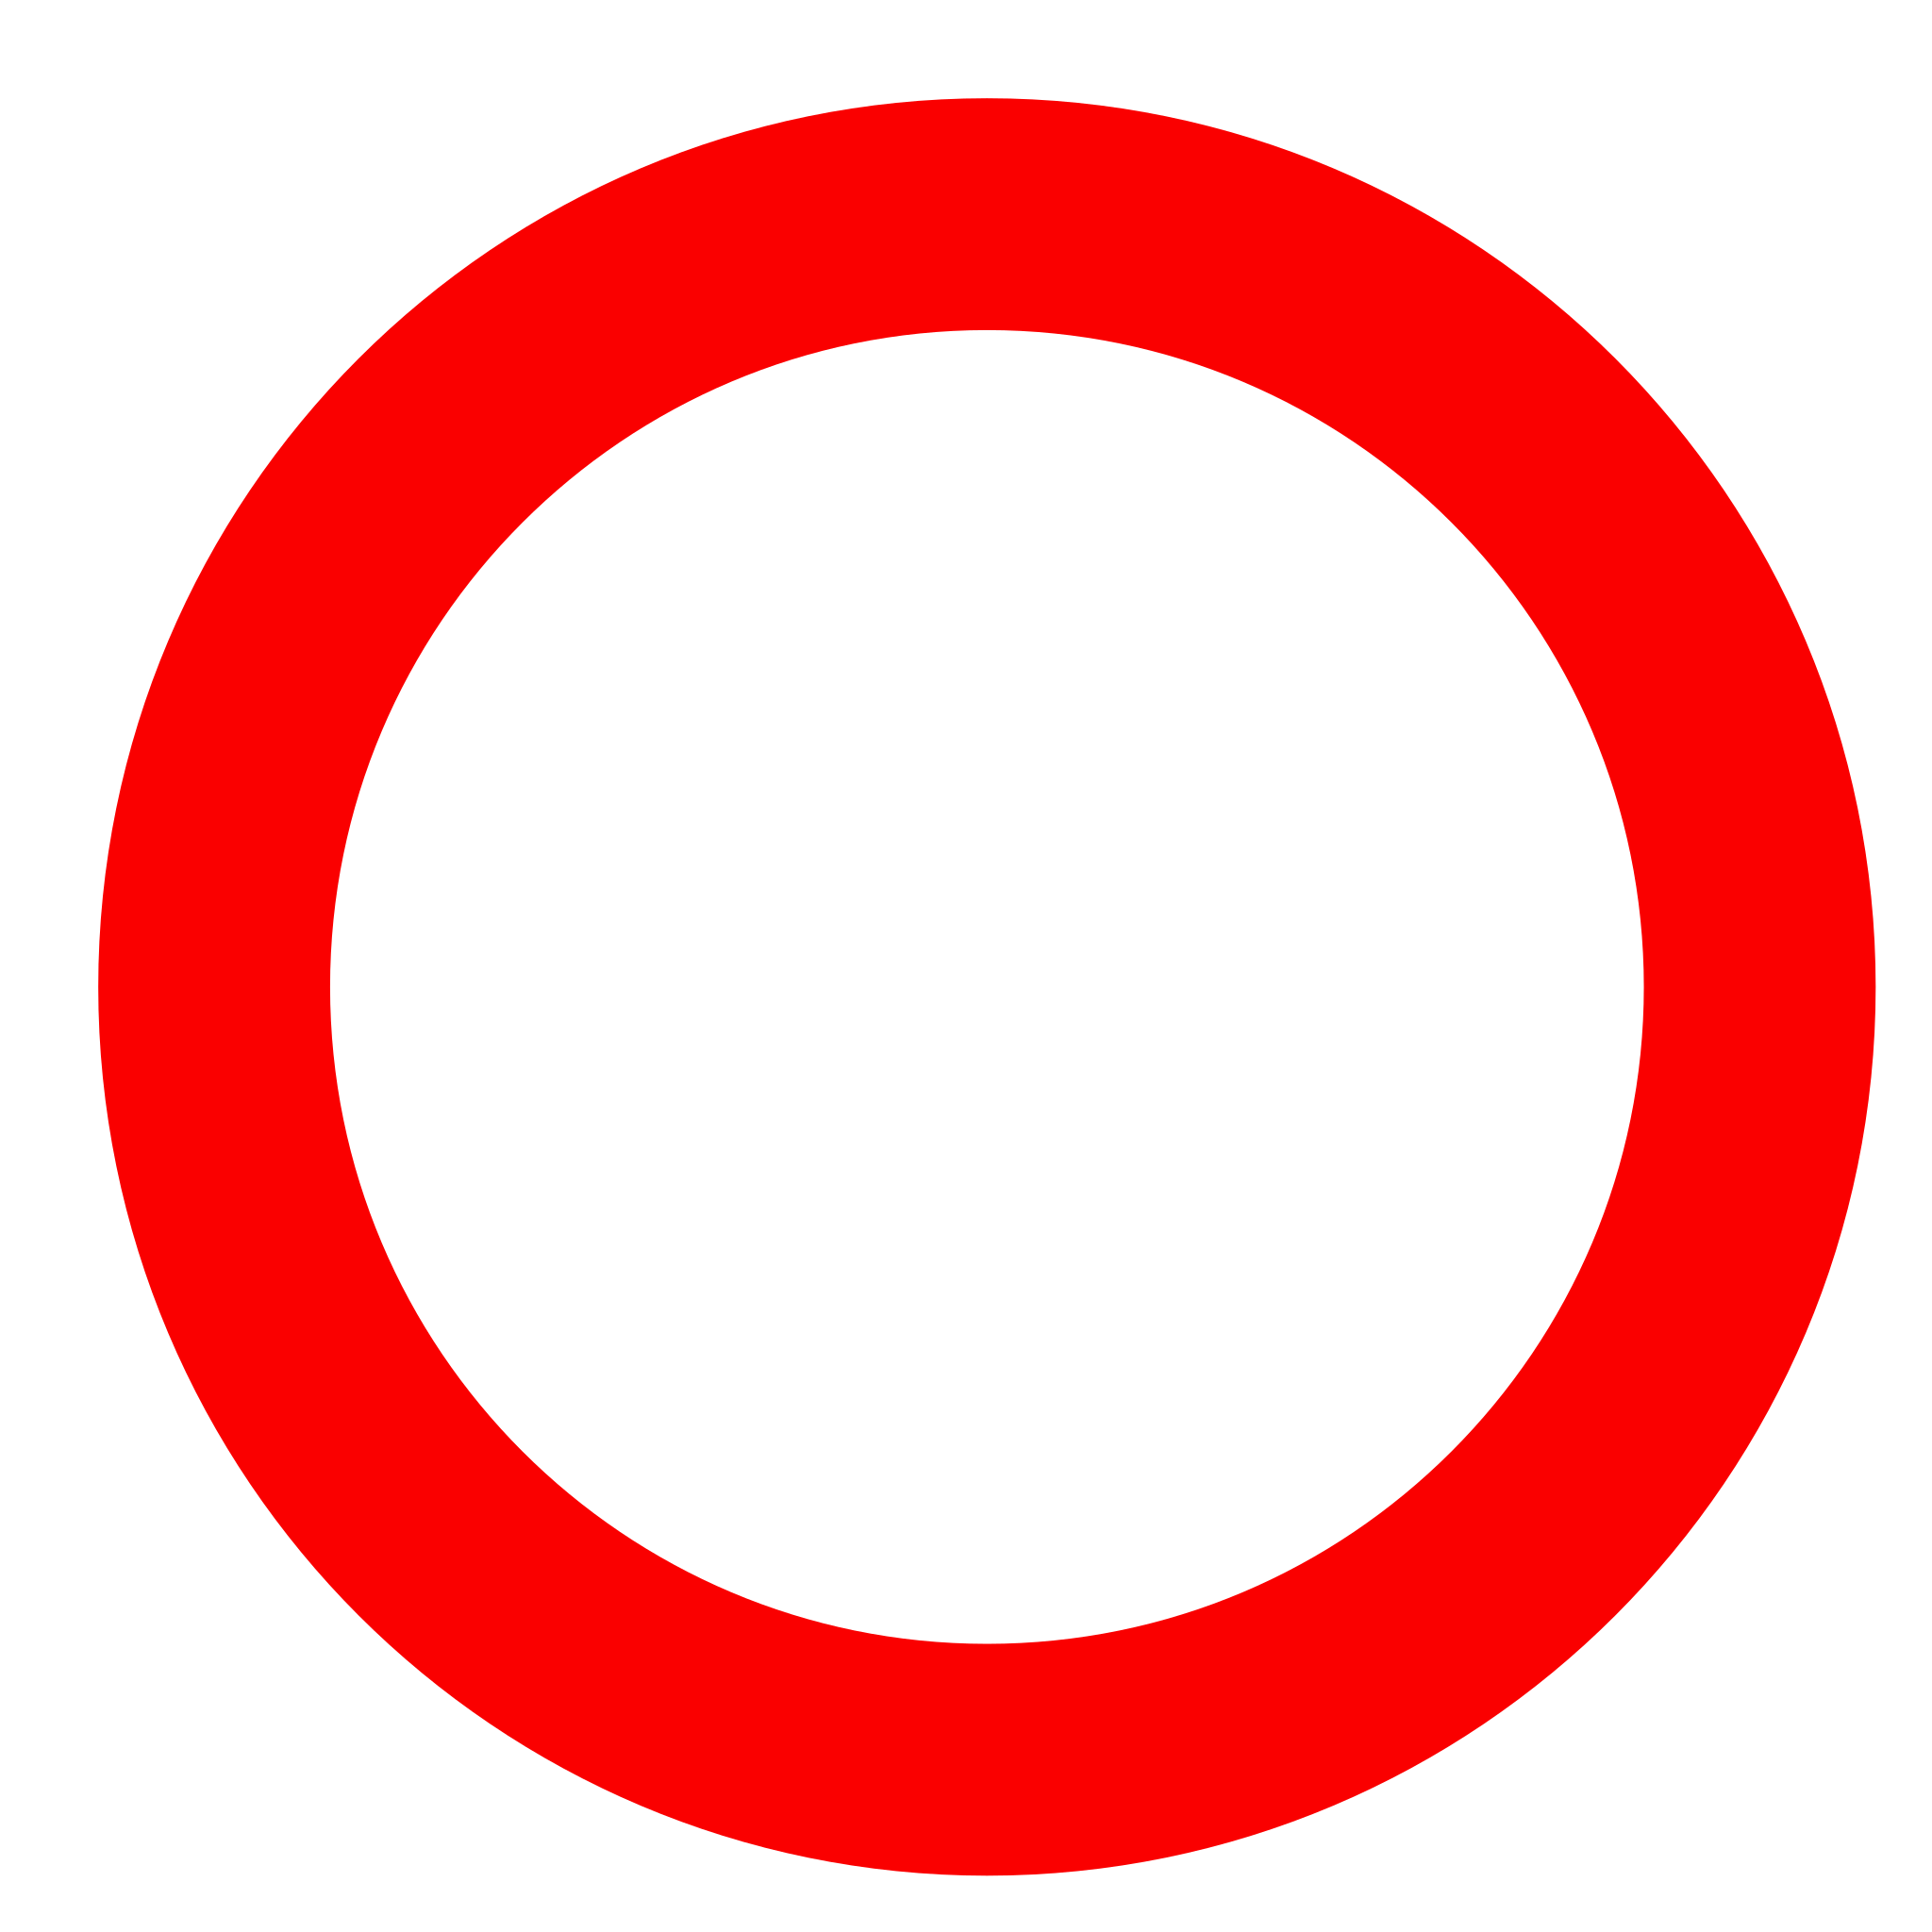 File:Red circle frame transparent.svg - Wikimedia Commons